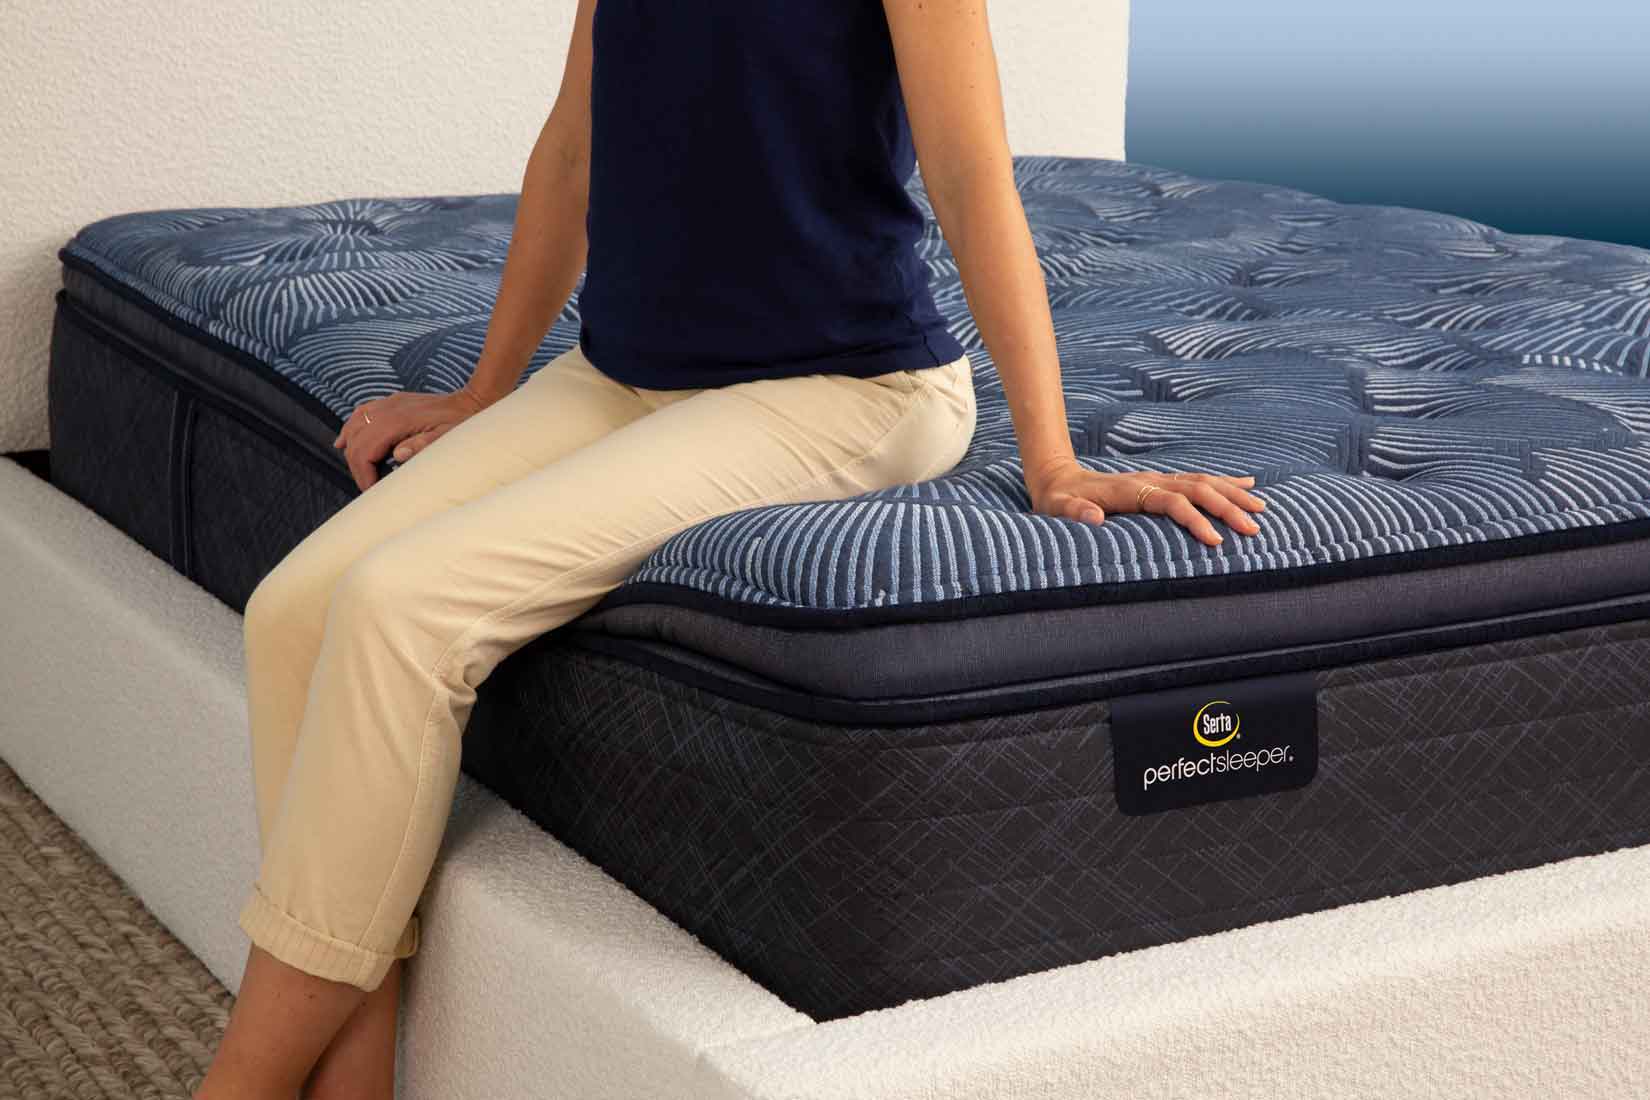 What You Need To Know About The Serta Perfect Sleeper Mattress